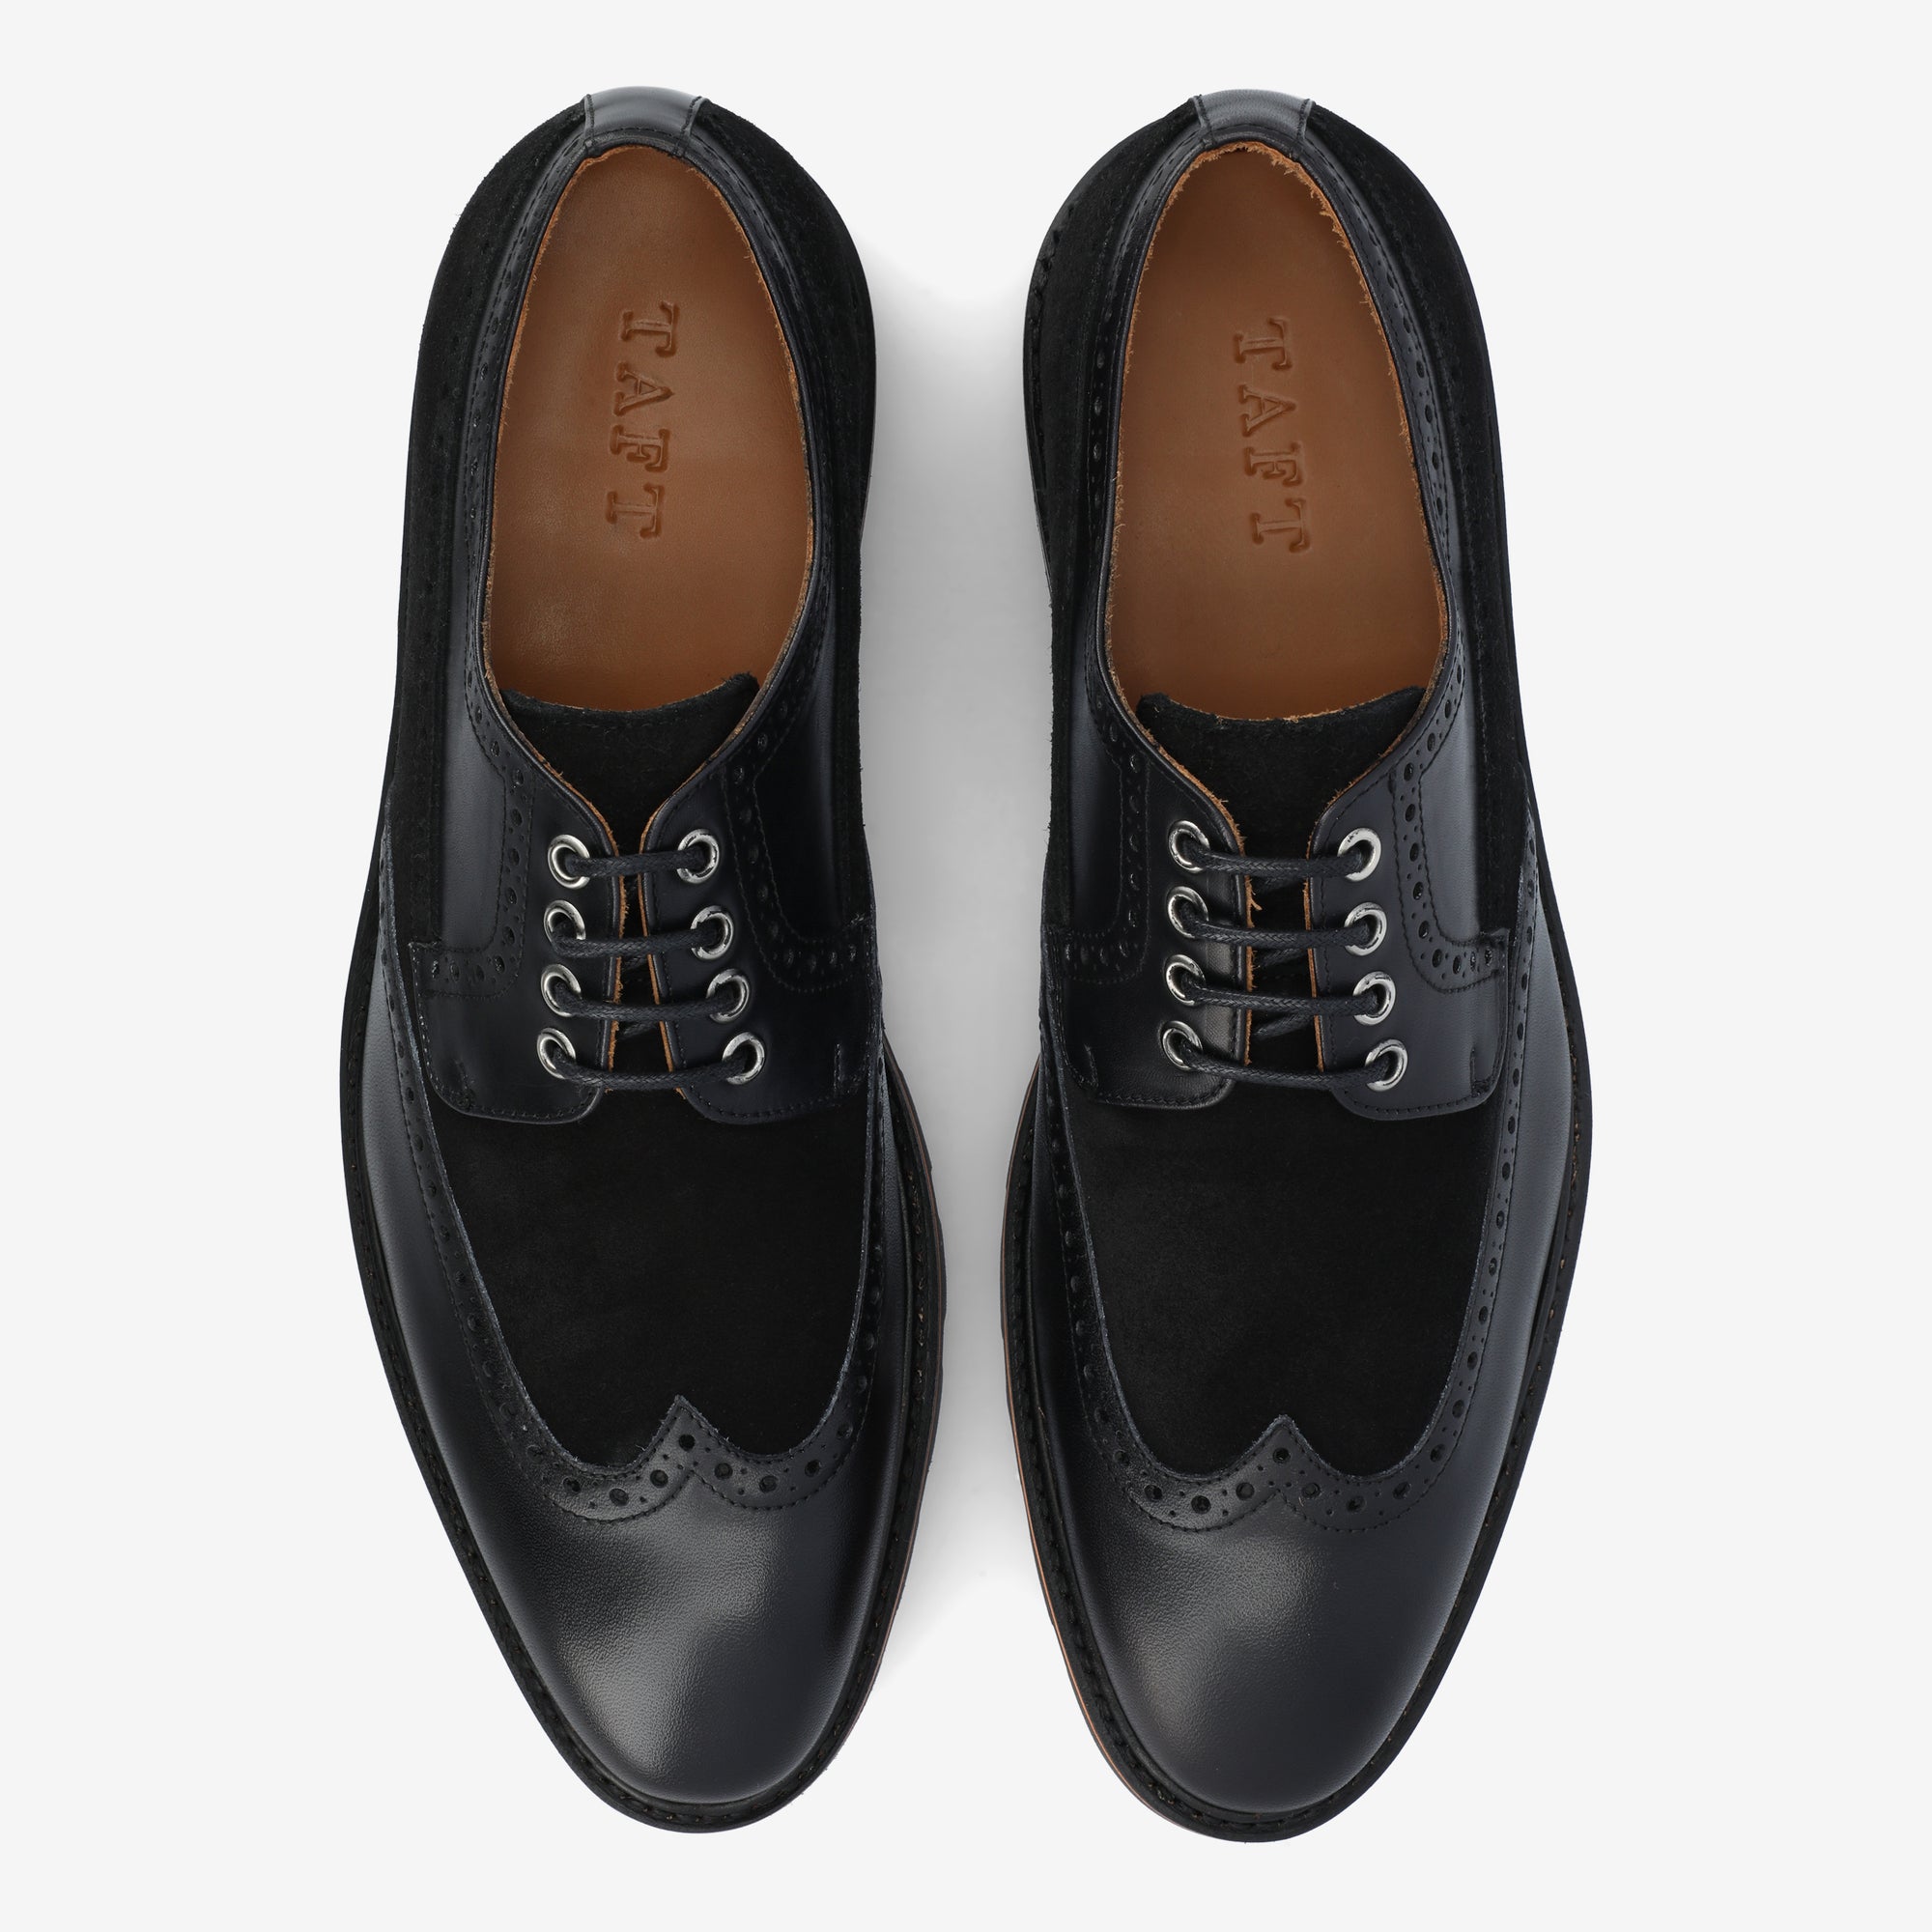 The Anderson Shoe in Black (Last Chance, Final Sale)